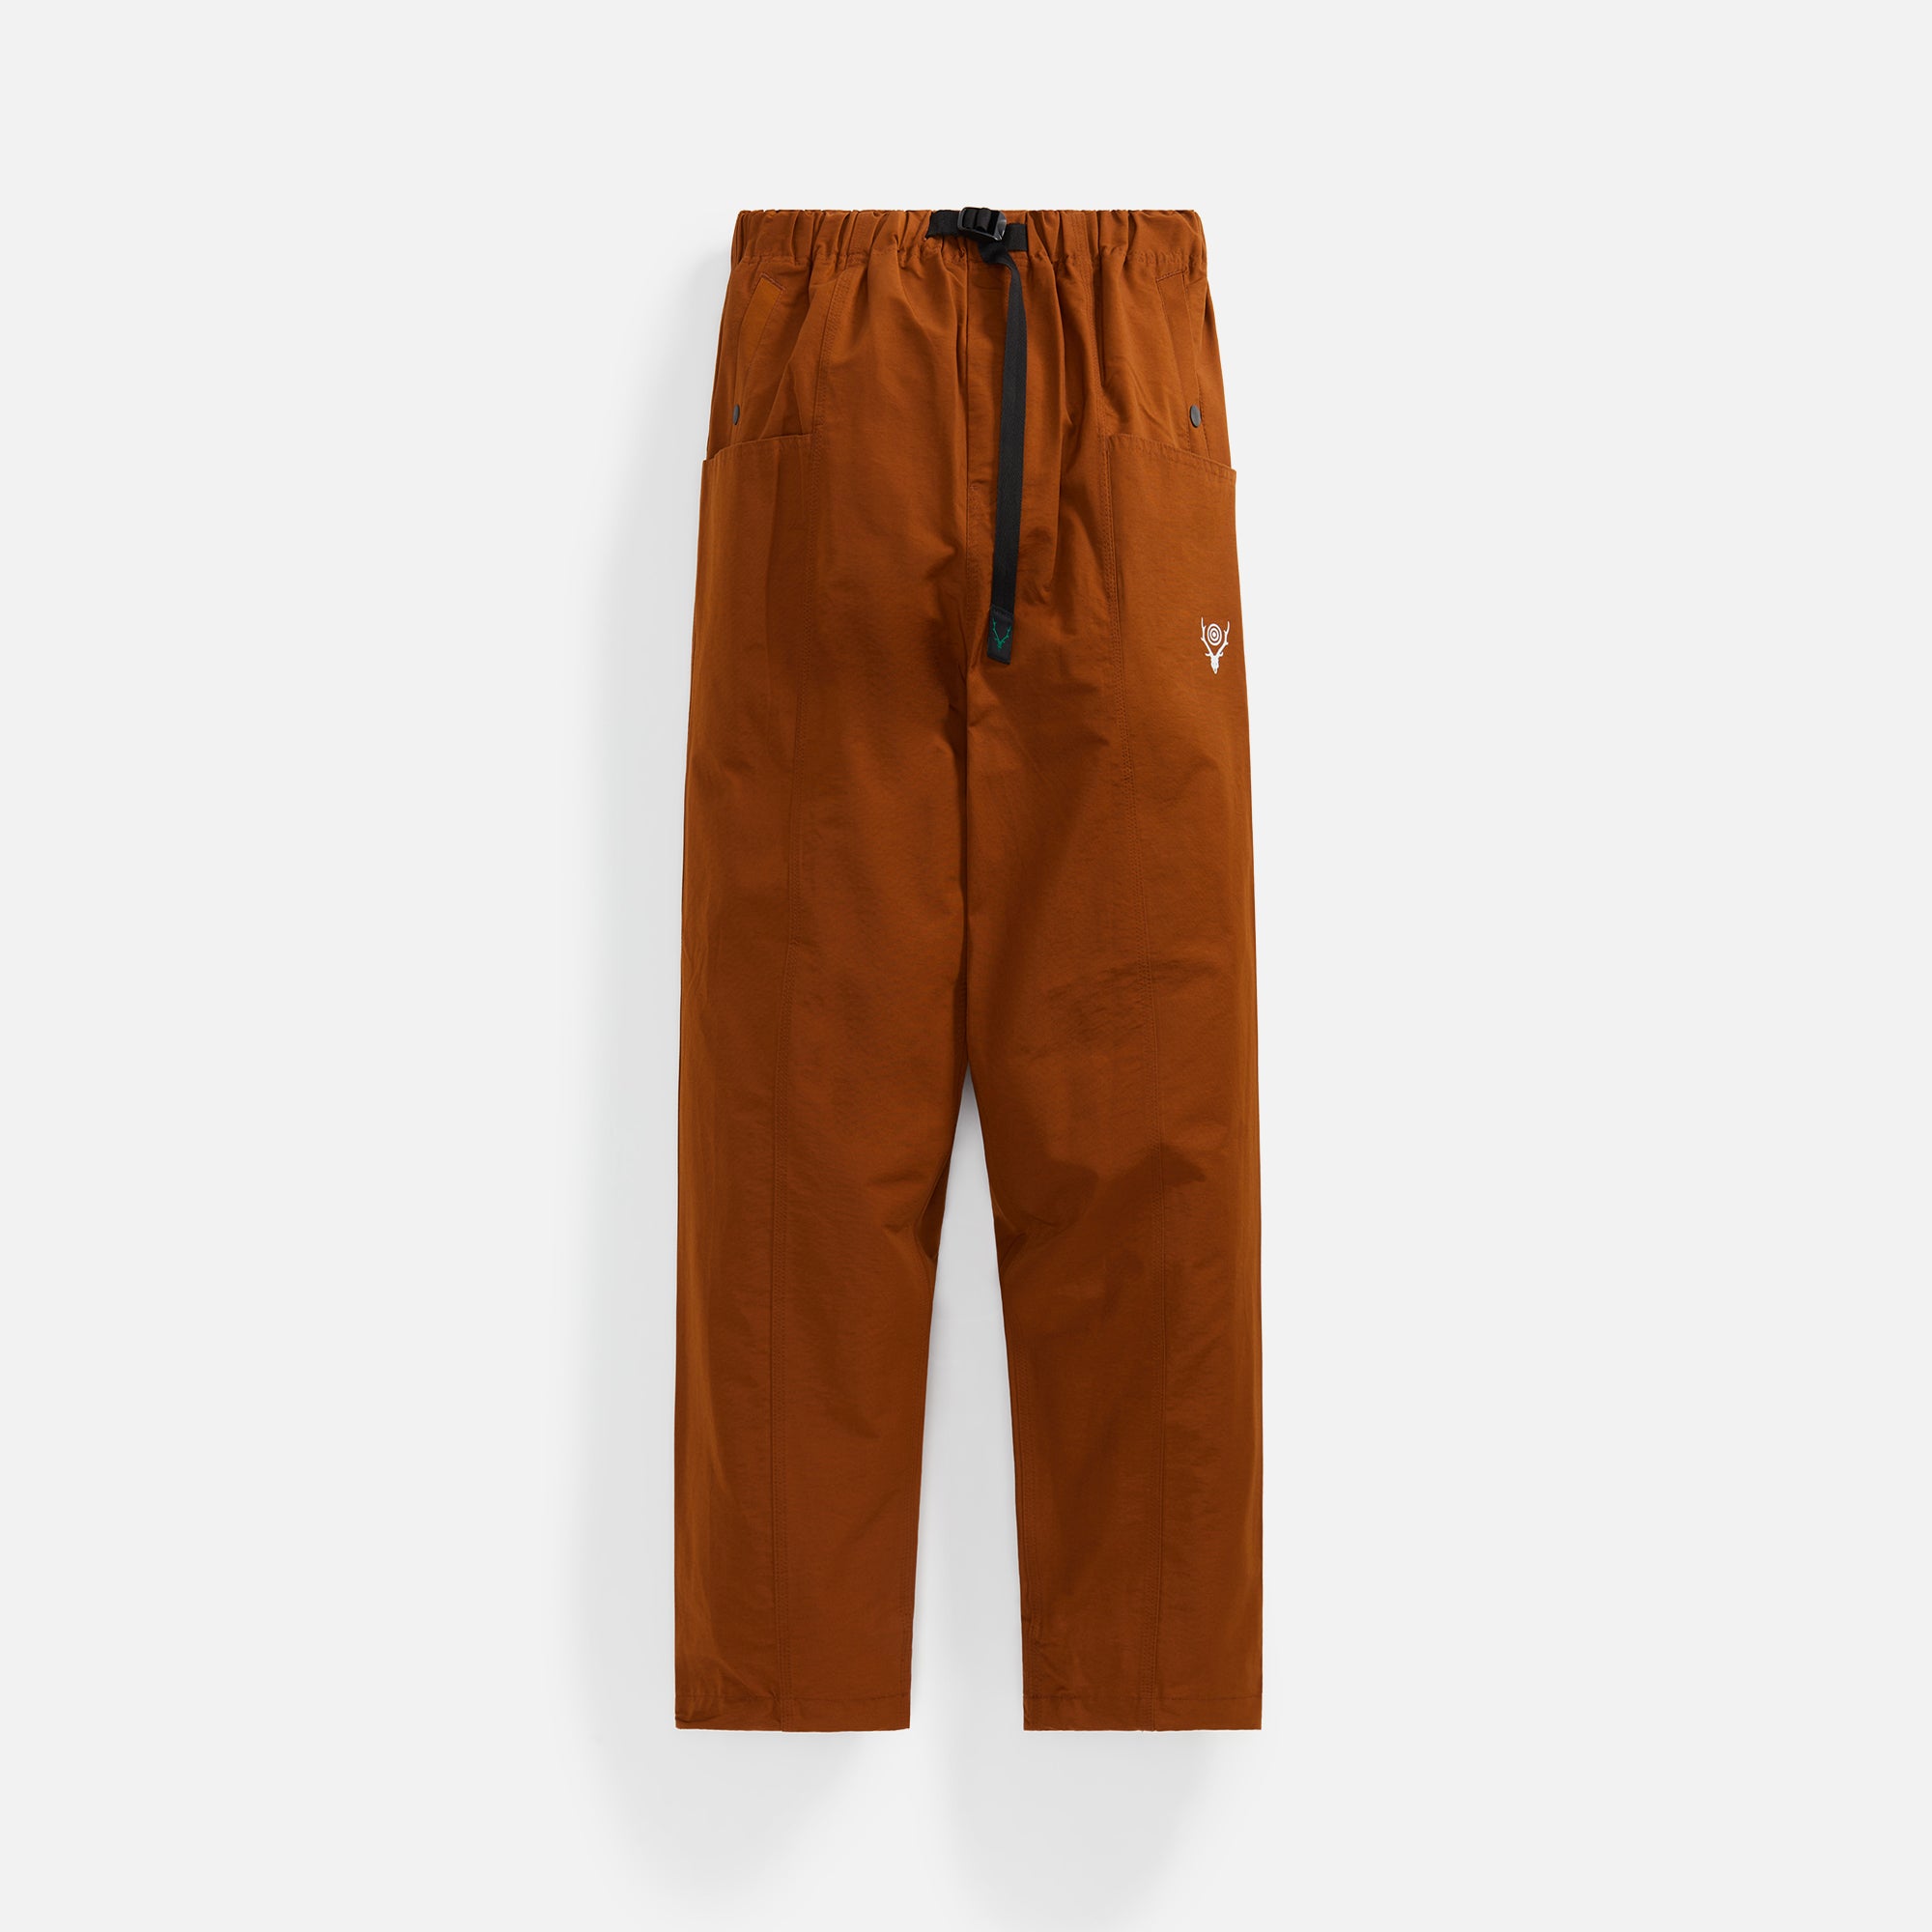 South2 West8 Belted C.S. Pant - Grosgrain Brown